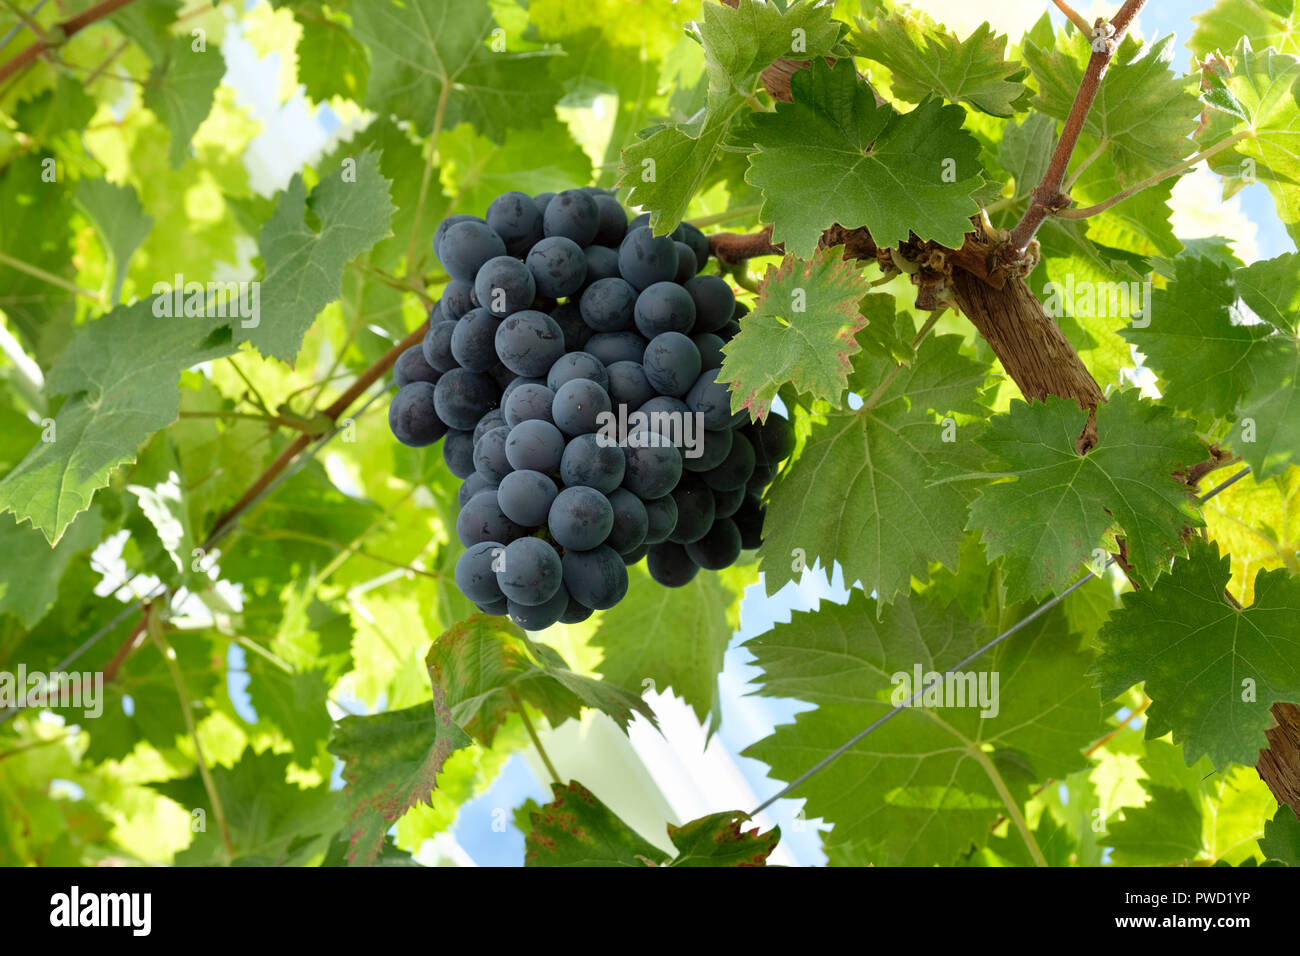 Black table grapes (Vitis vinifera) hanging from the vine in a greenhouse, Sussex, England, UK Stock Photo